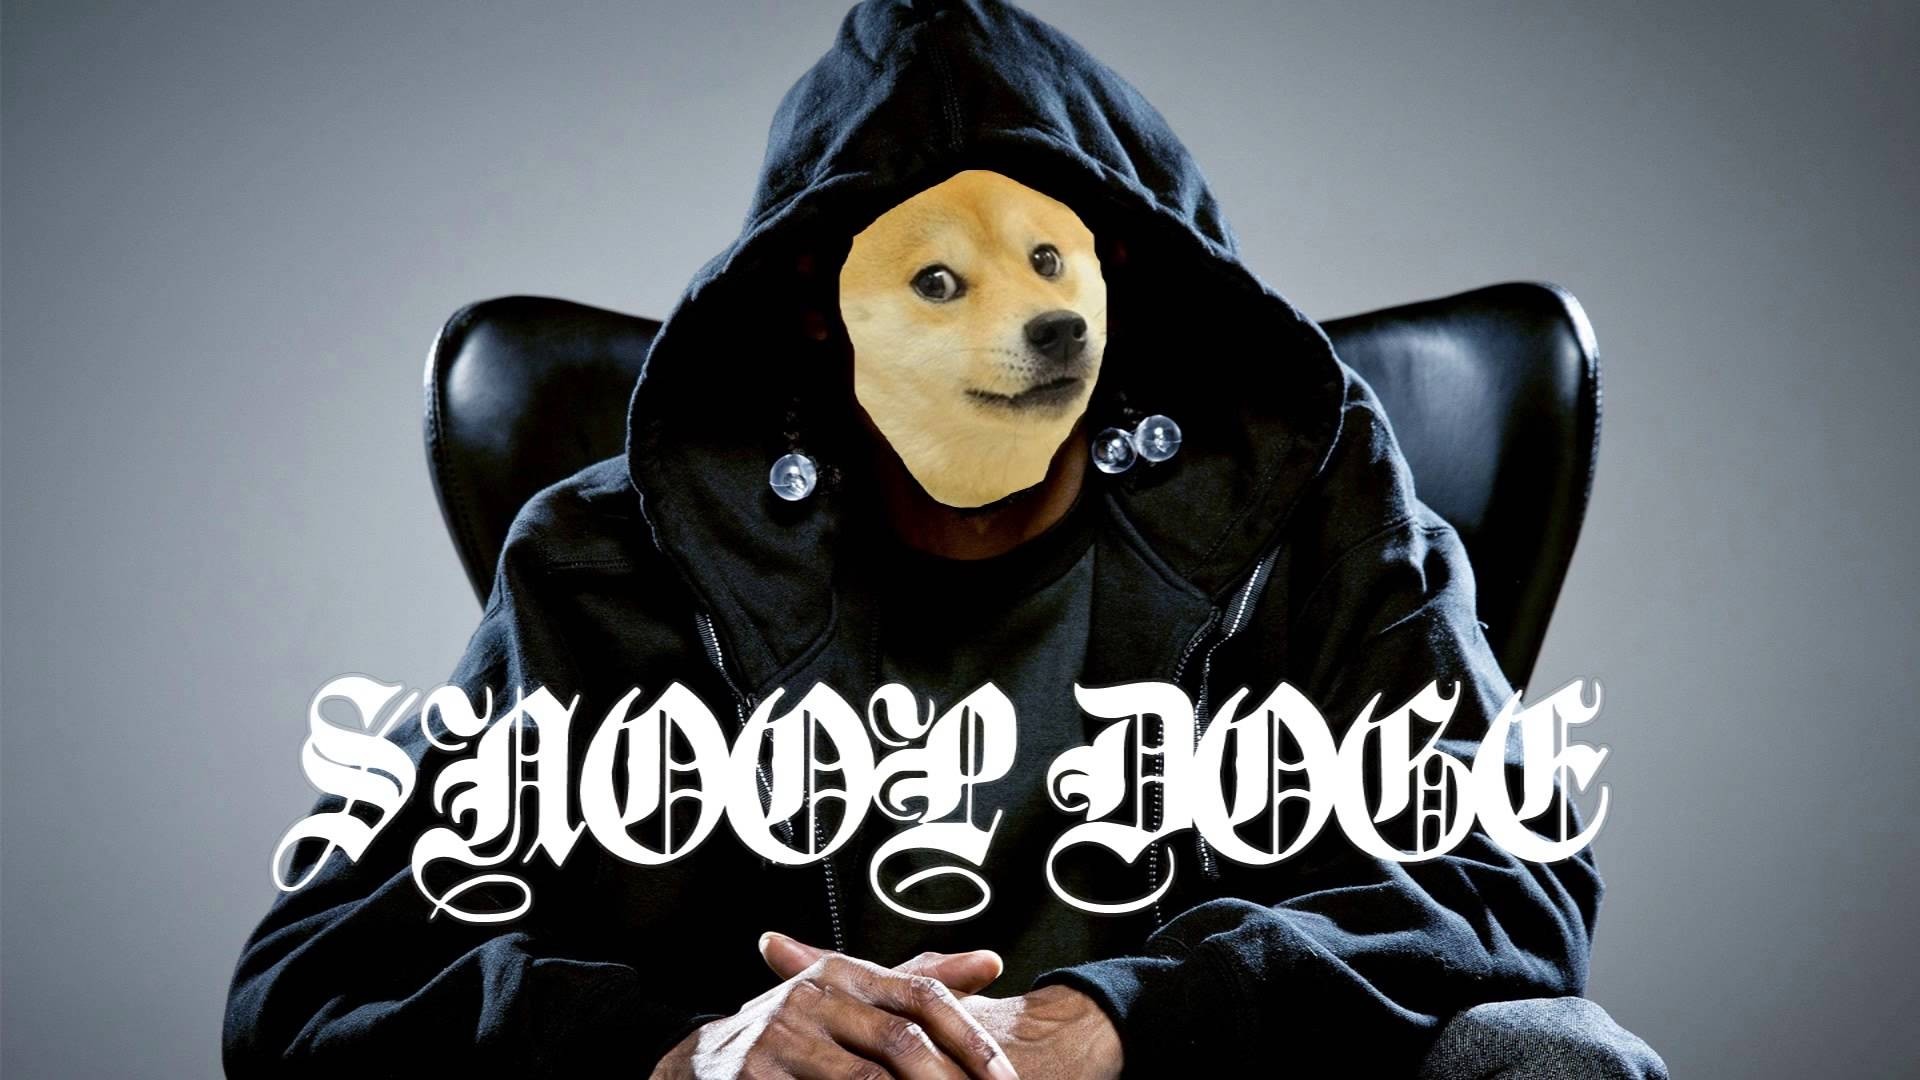 Doge background ·① Download free cool wallpapers for desktop and mobile